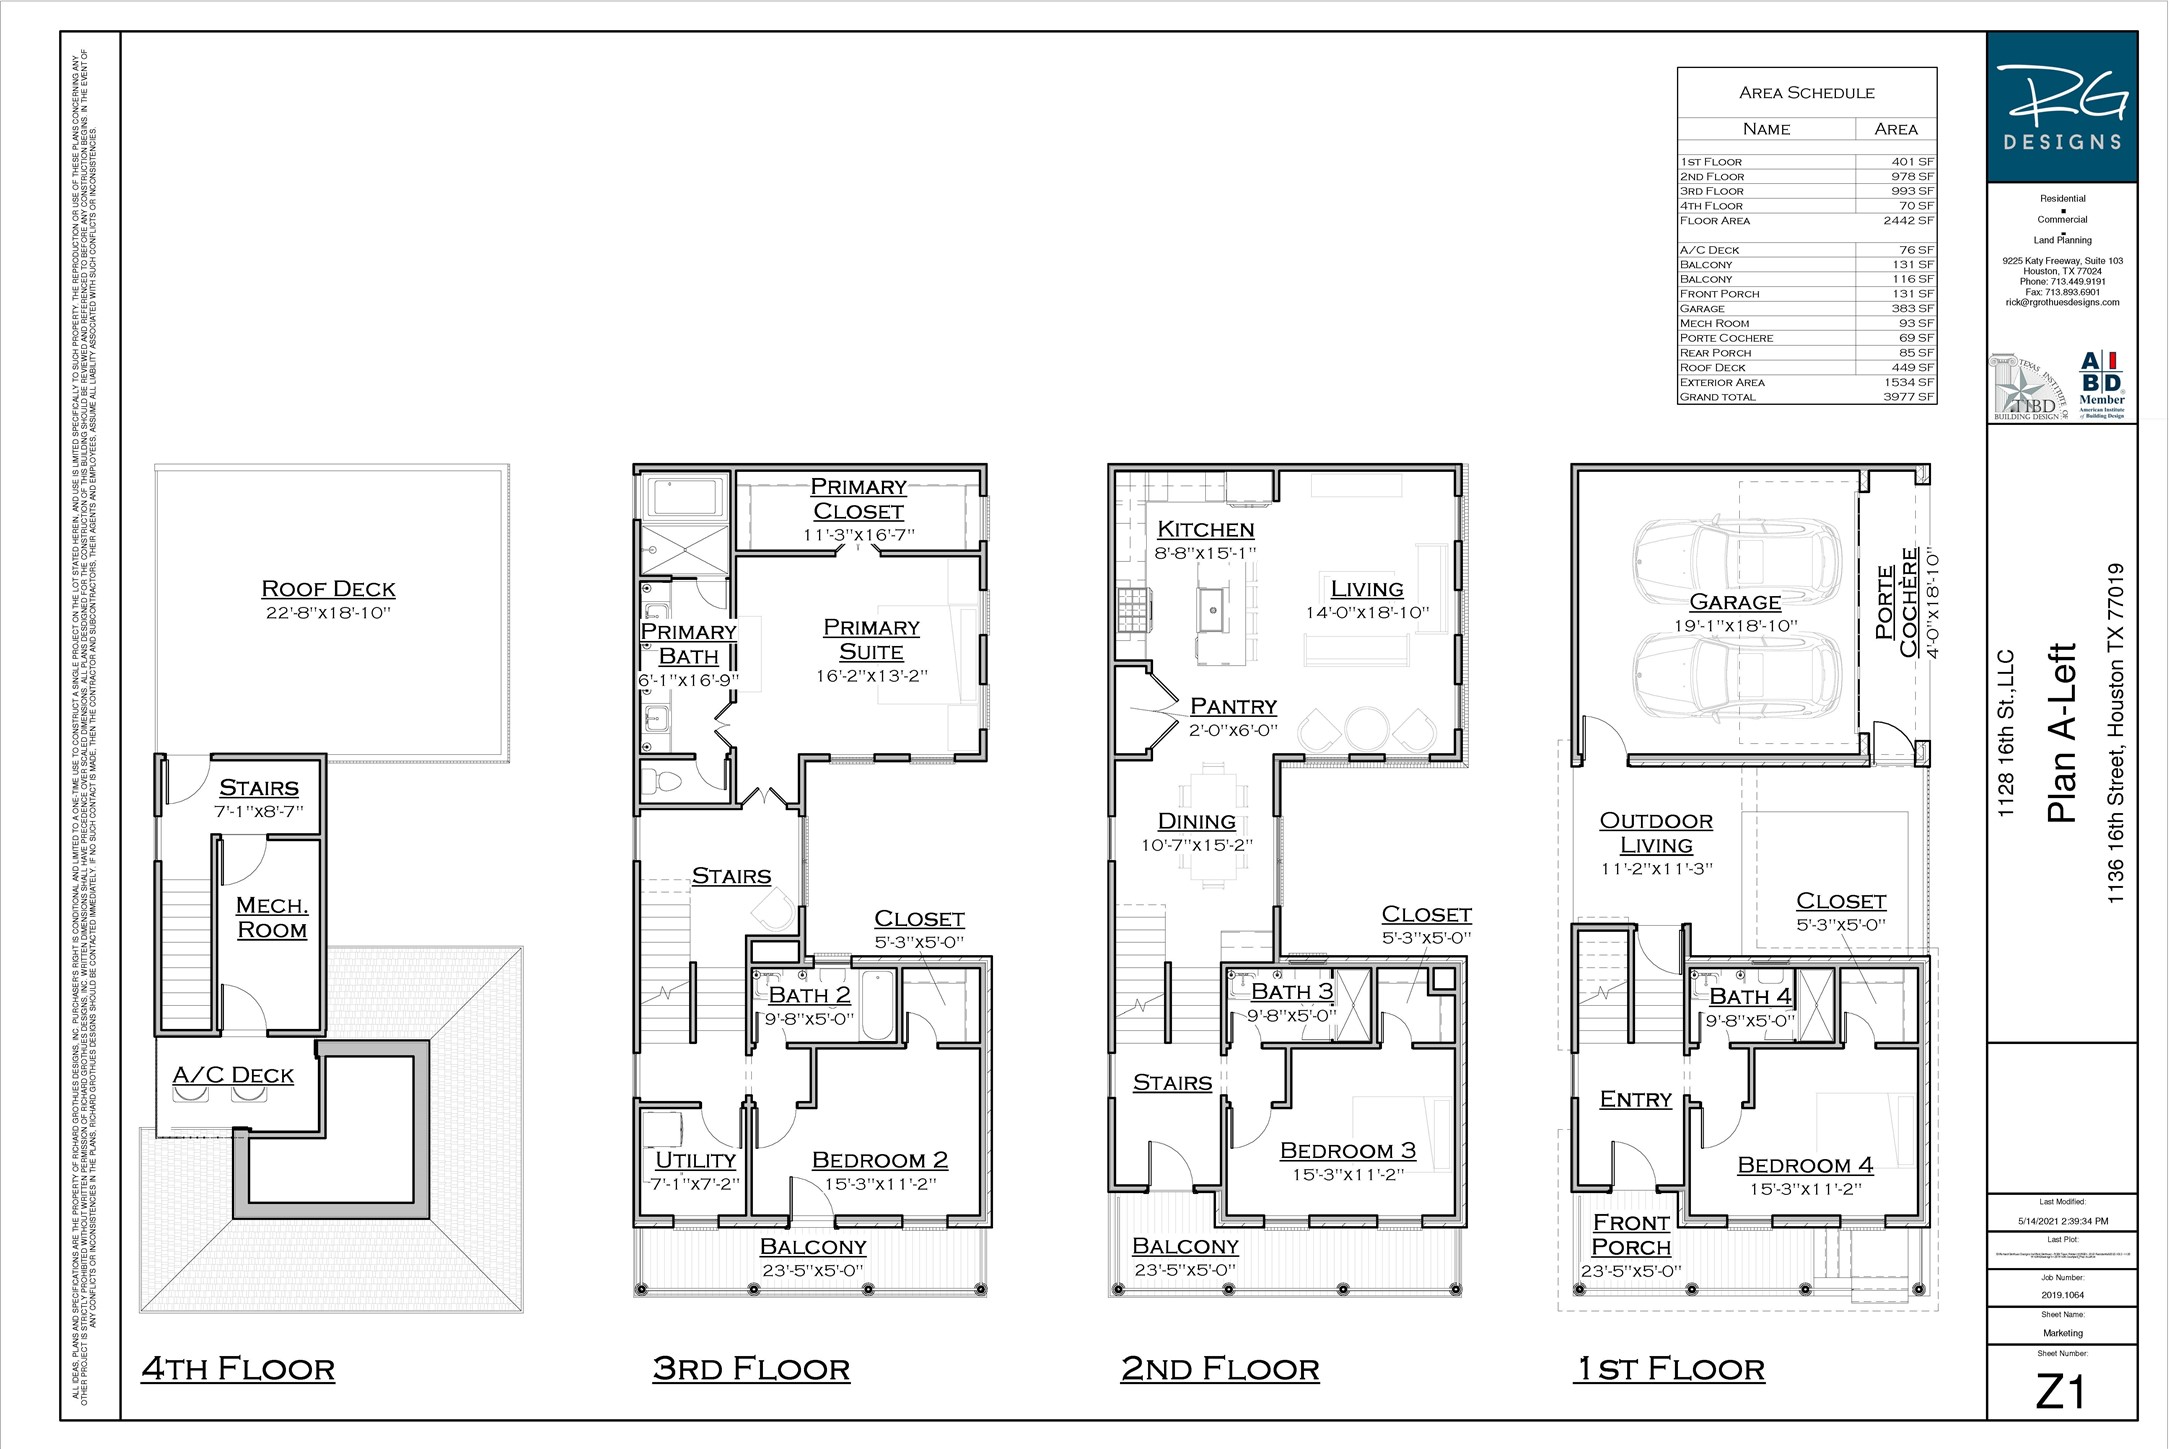 Floorplan for front home